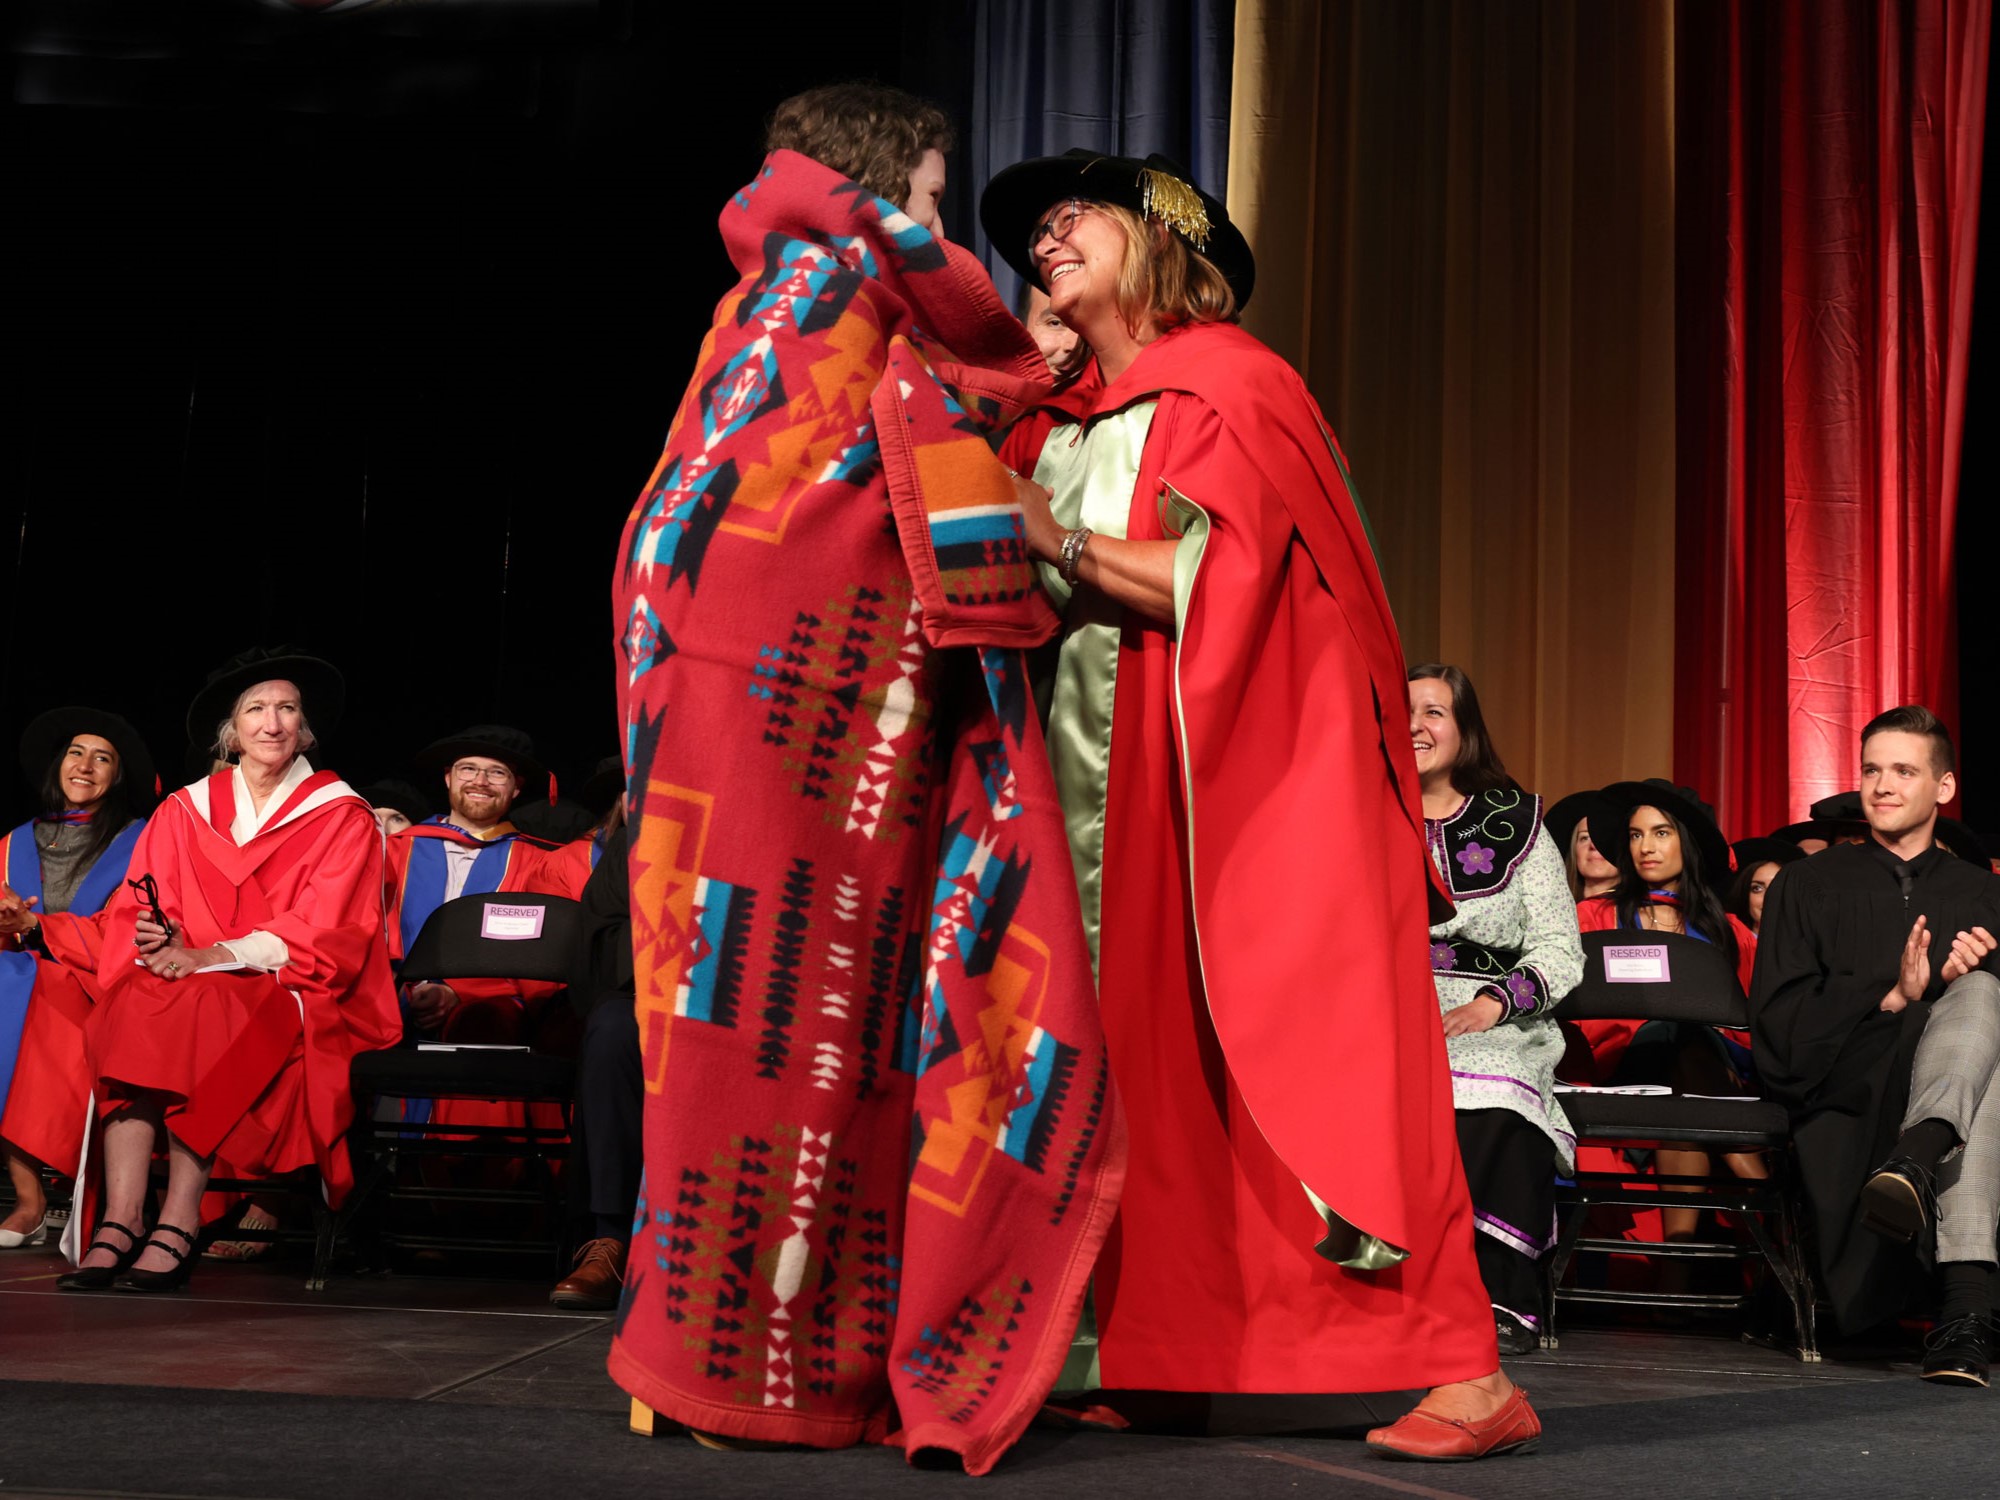 A graduating indigenous undergraduate nursing student being wrapped in a ceremonial blanket by the director of the school of nursing, who is wearing red and gold academic regalia. They are both smiling as they look at each other.